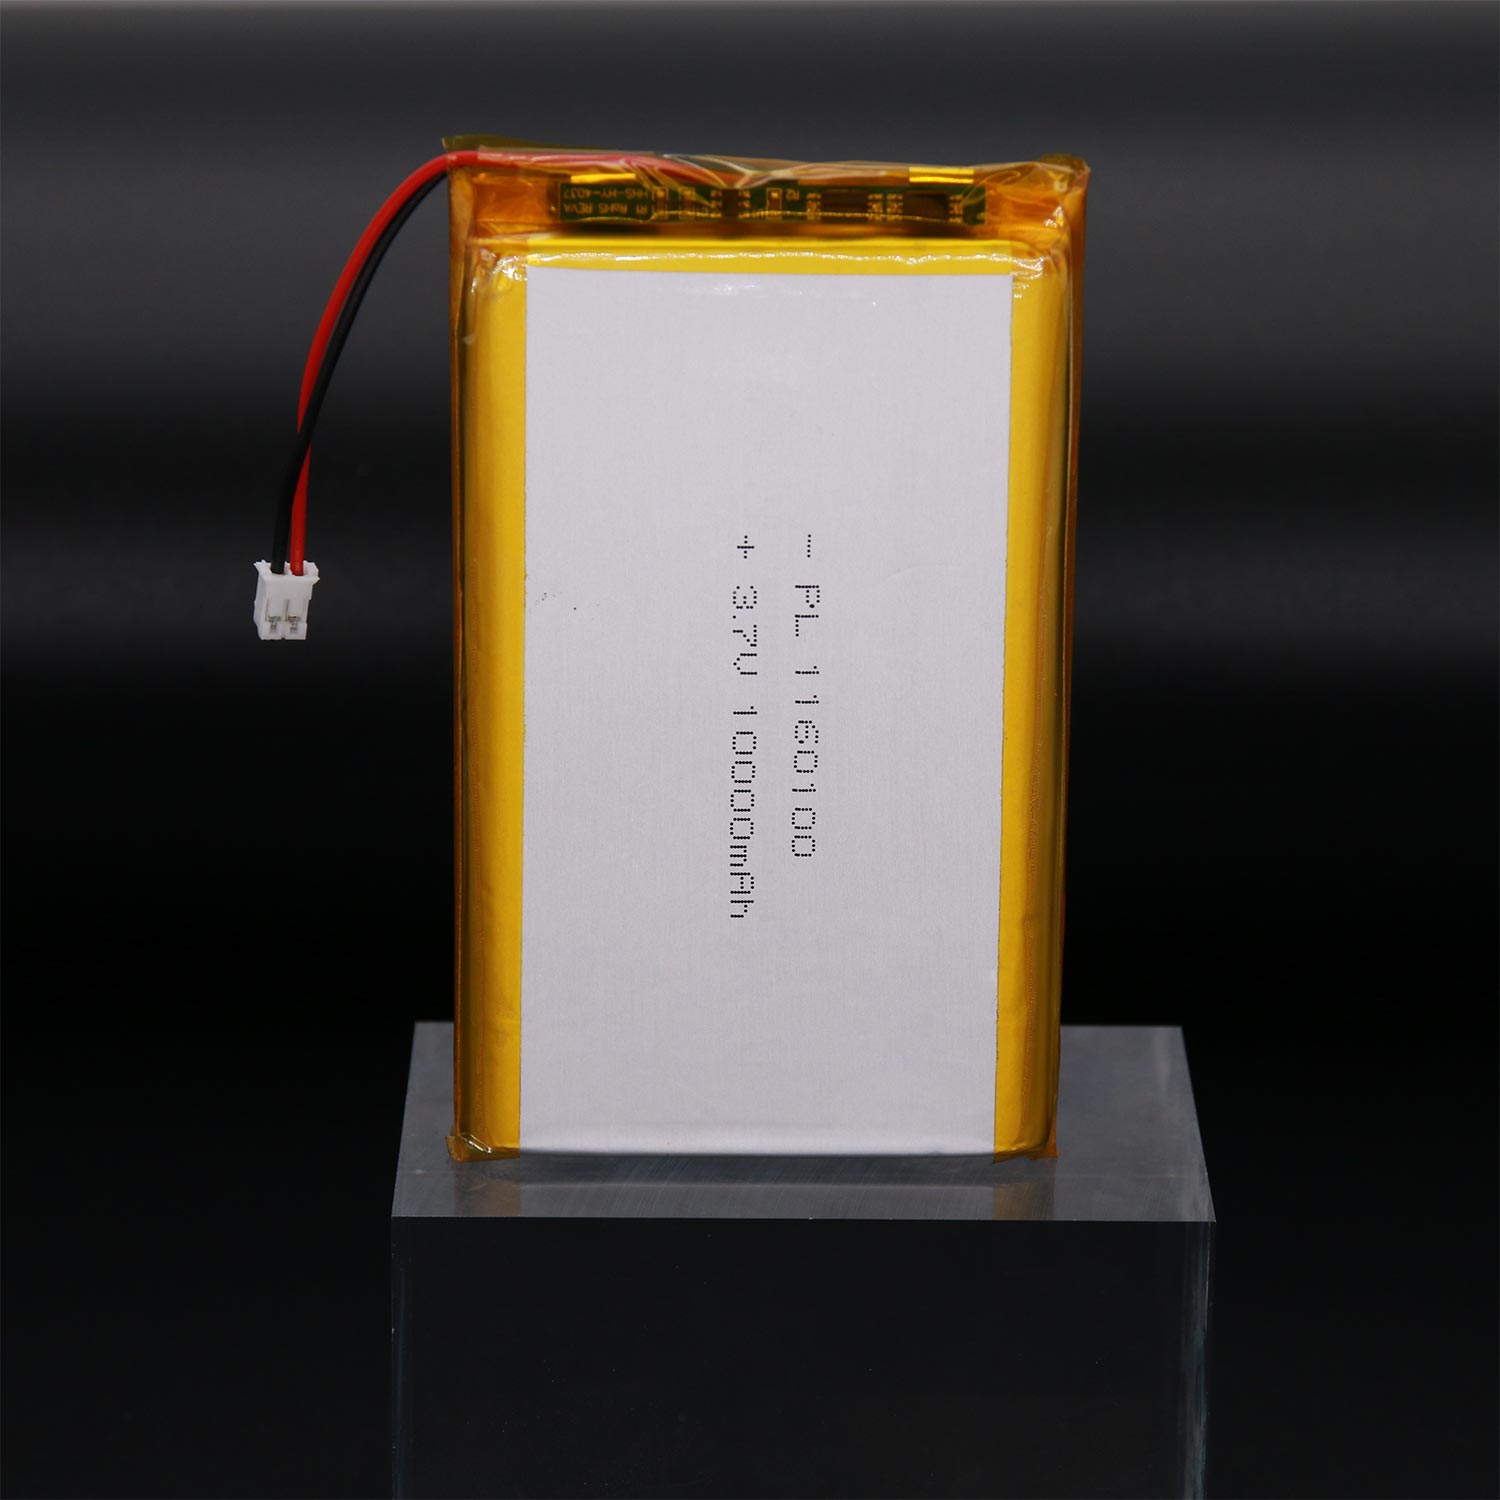 LiPO Battery in Body Fat Monitor - Lithium ion Battery